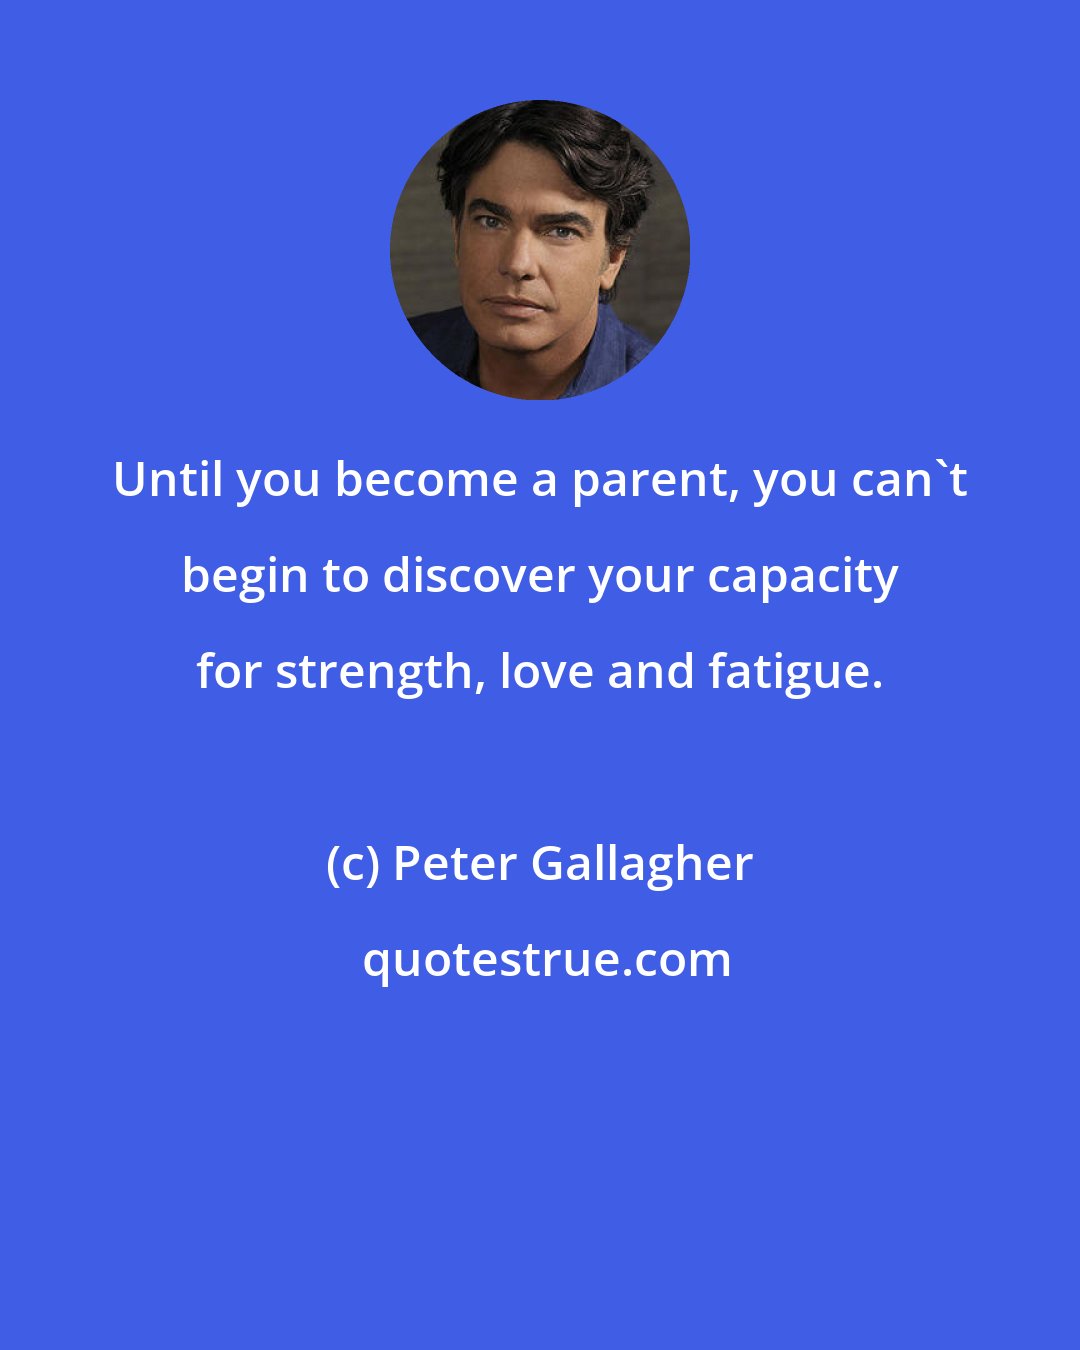 Peter Gallagher: Until you become a parent, you can't begin to discover your capacity for strength, love and fatigue.